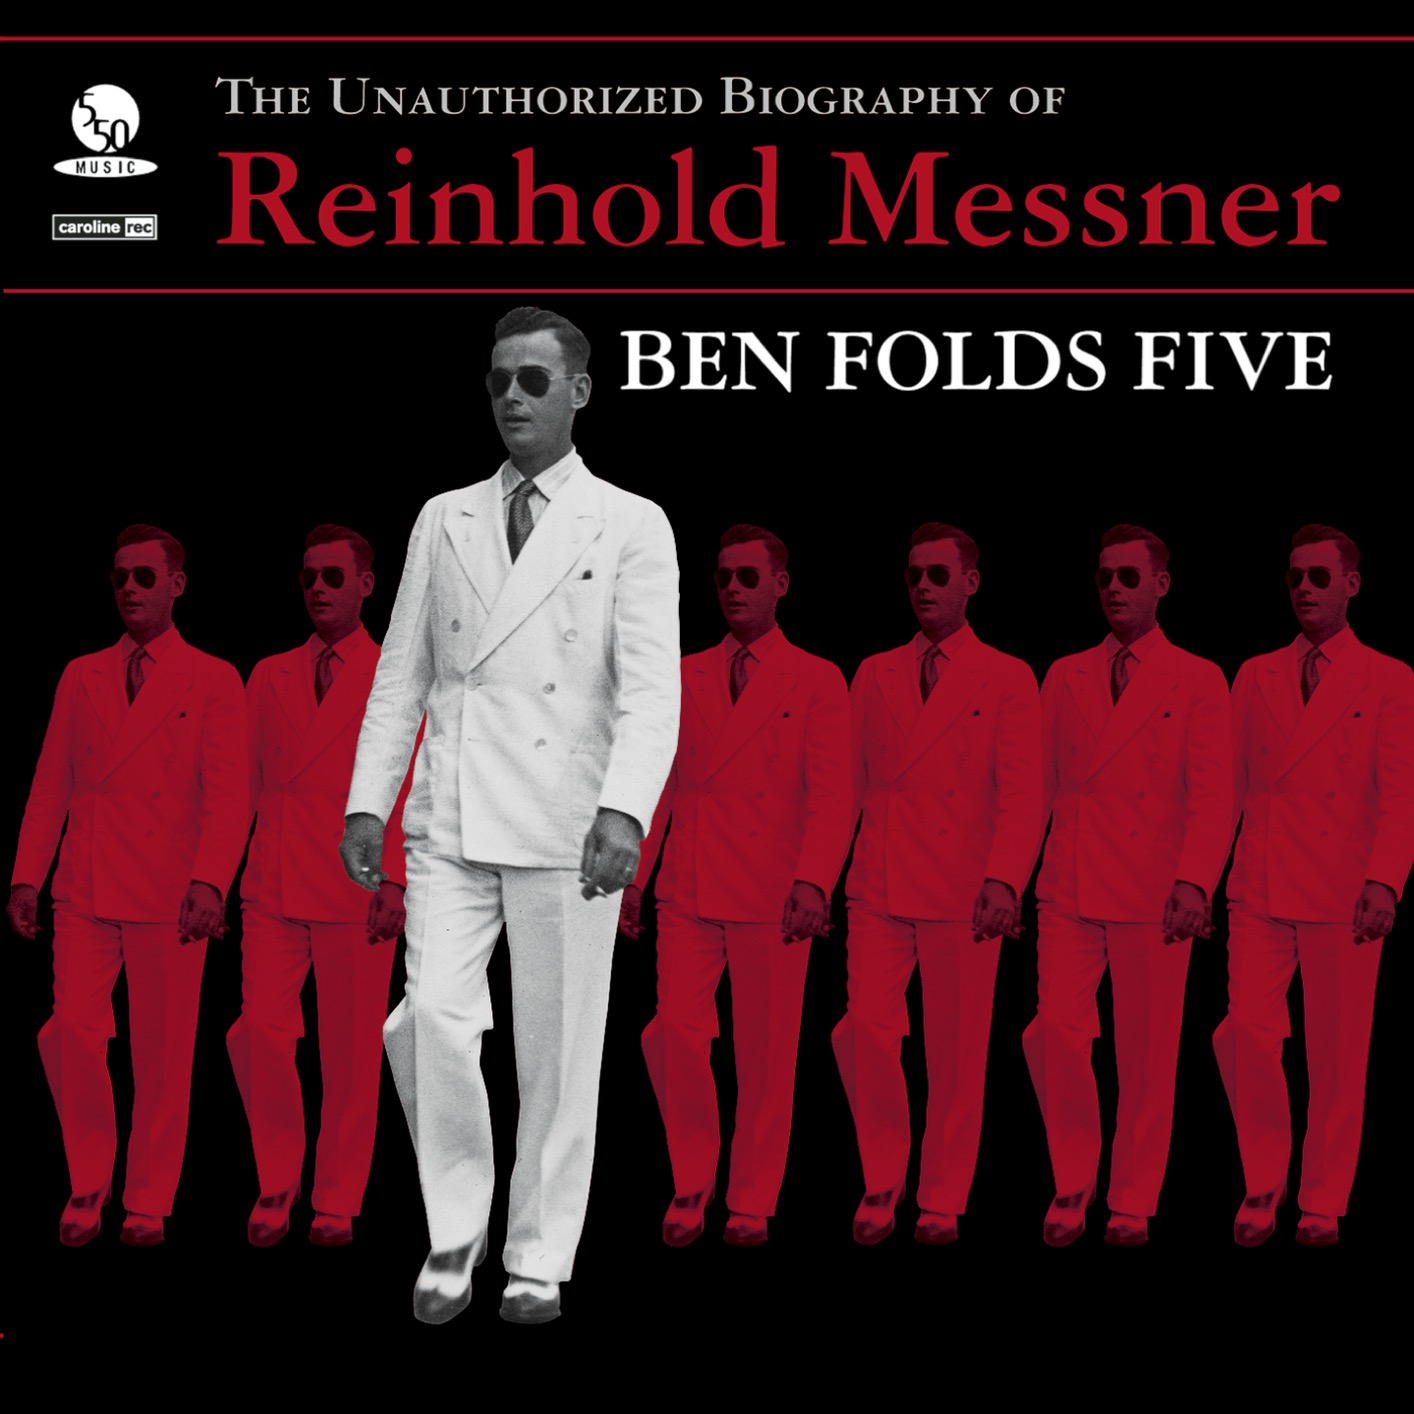 Ben Folds Five - The Unauthorized Biography Of Reinhold Messner (1999/2017) [FLAC 24bit/96kHz]